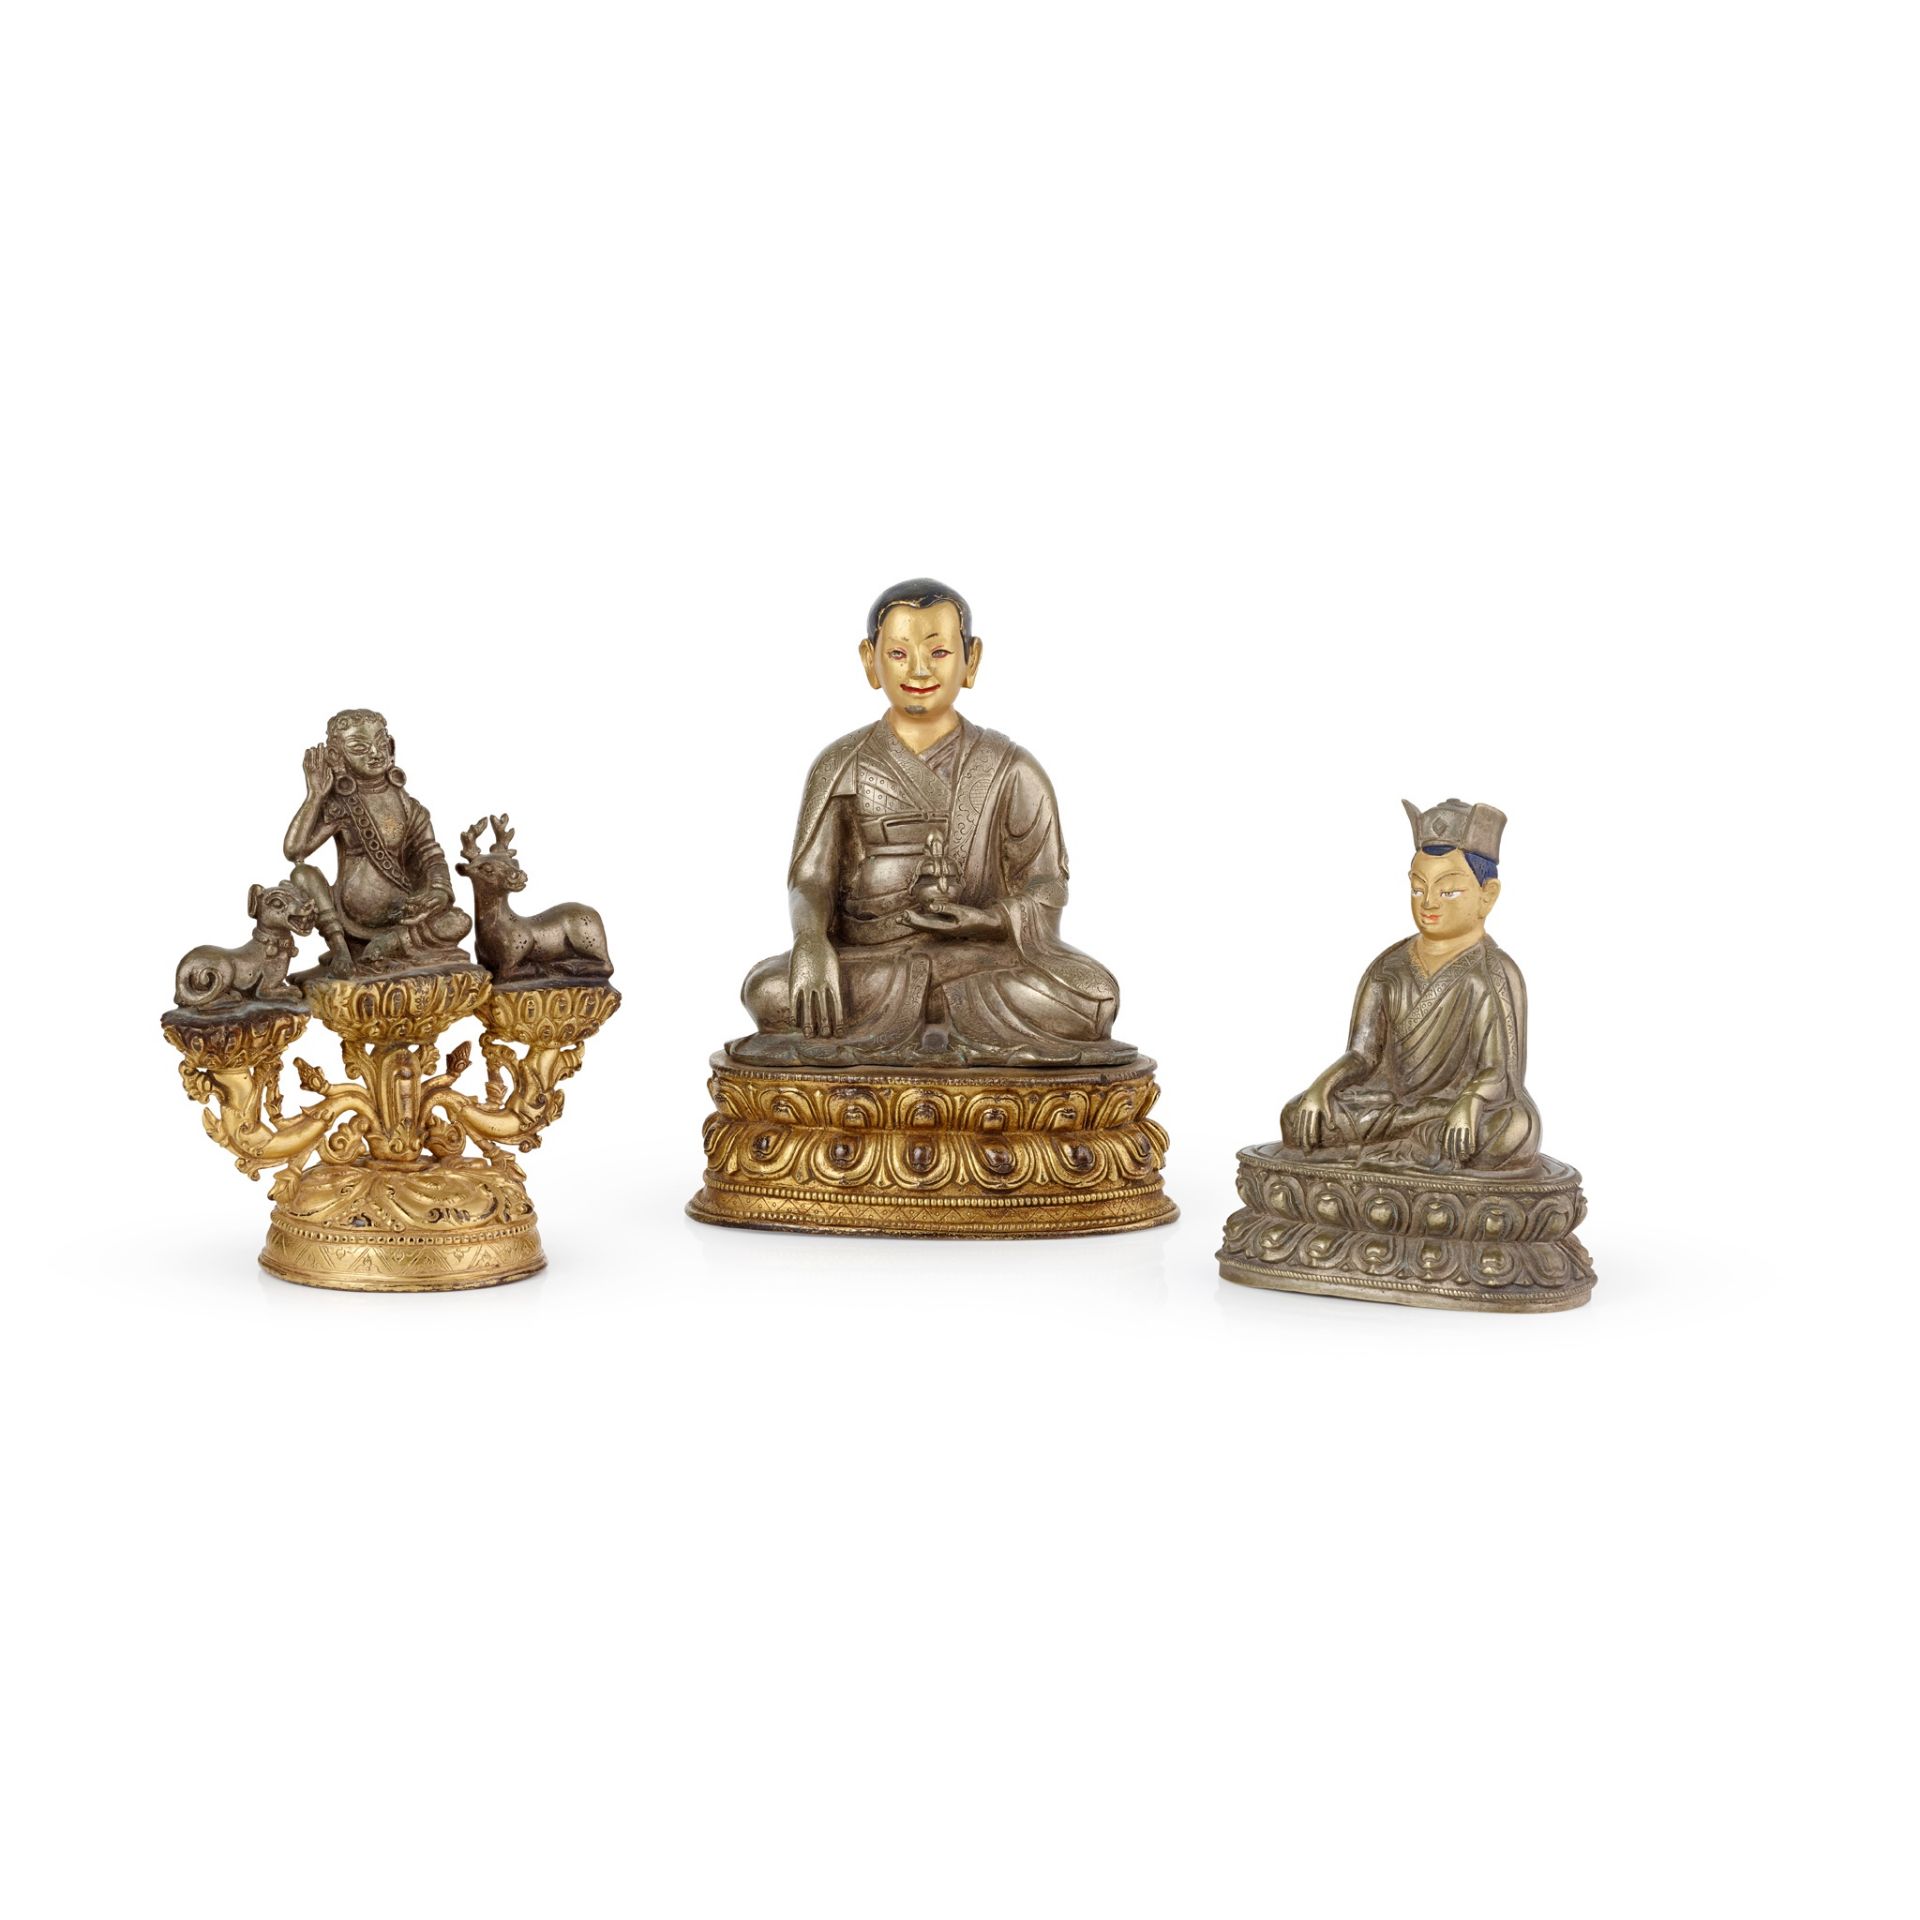 GROUP OF THREE SILVER AND GILT COPPER ALLOY FIGURES OF BUDDHIST MASTERS QING DYNASTY, 19TH CENTURY